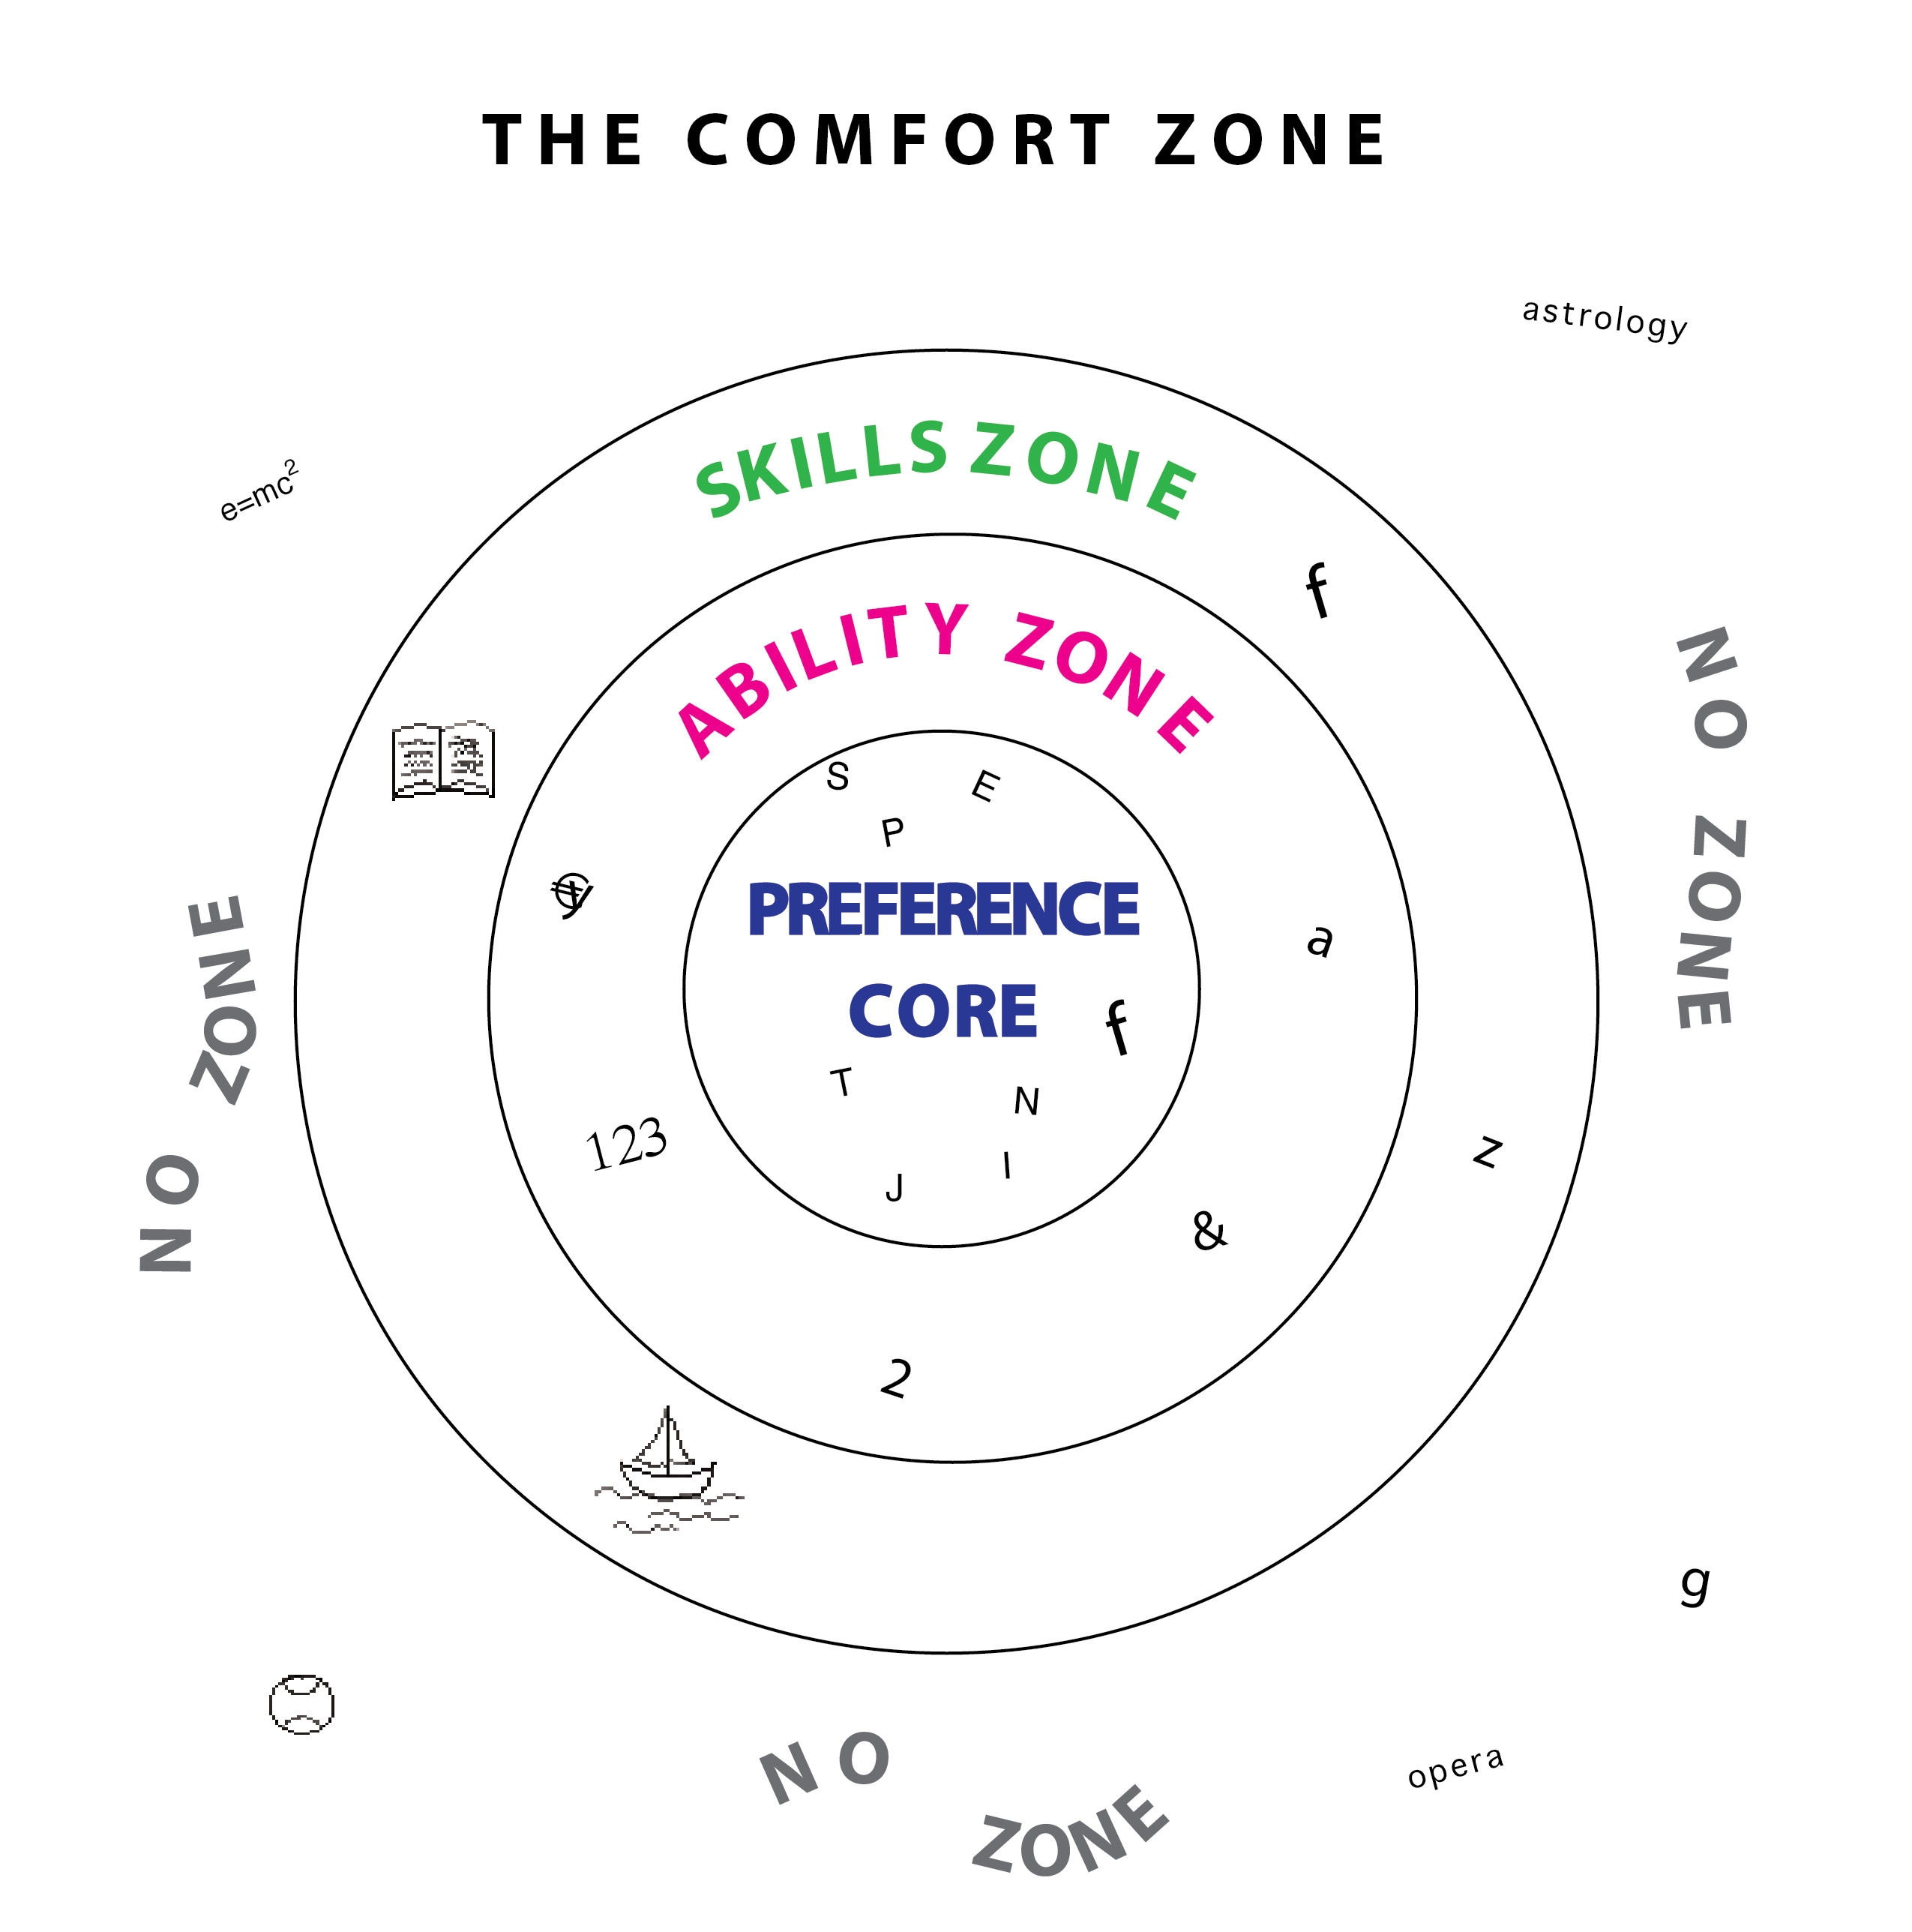 Comfort Zone graphic from the book Making Memories